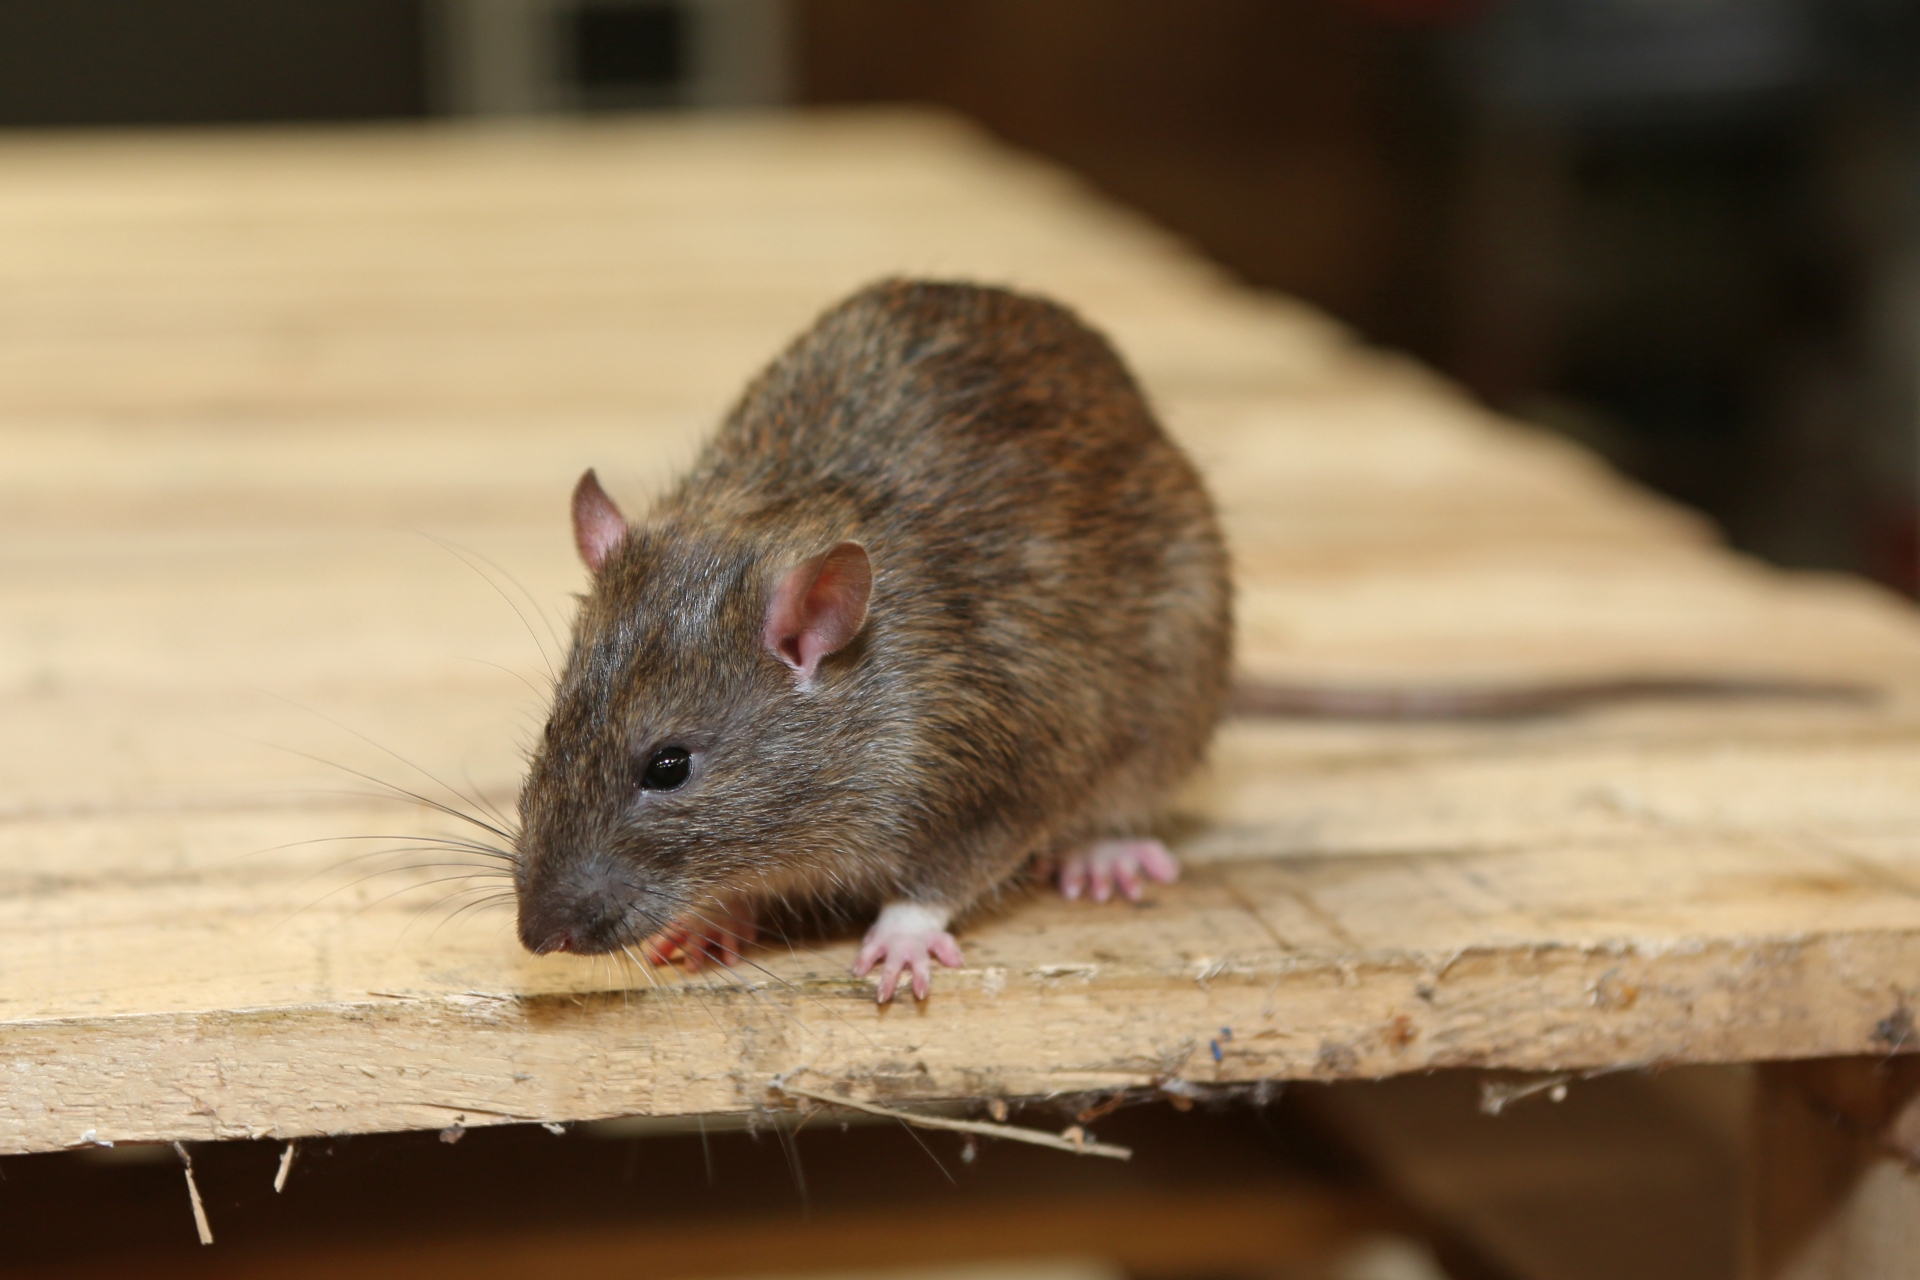 Rat extermination, Pest Control in Walthamstow, E17. Call Now 020 8166 9746